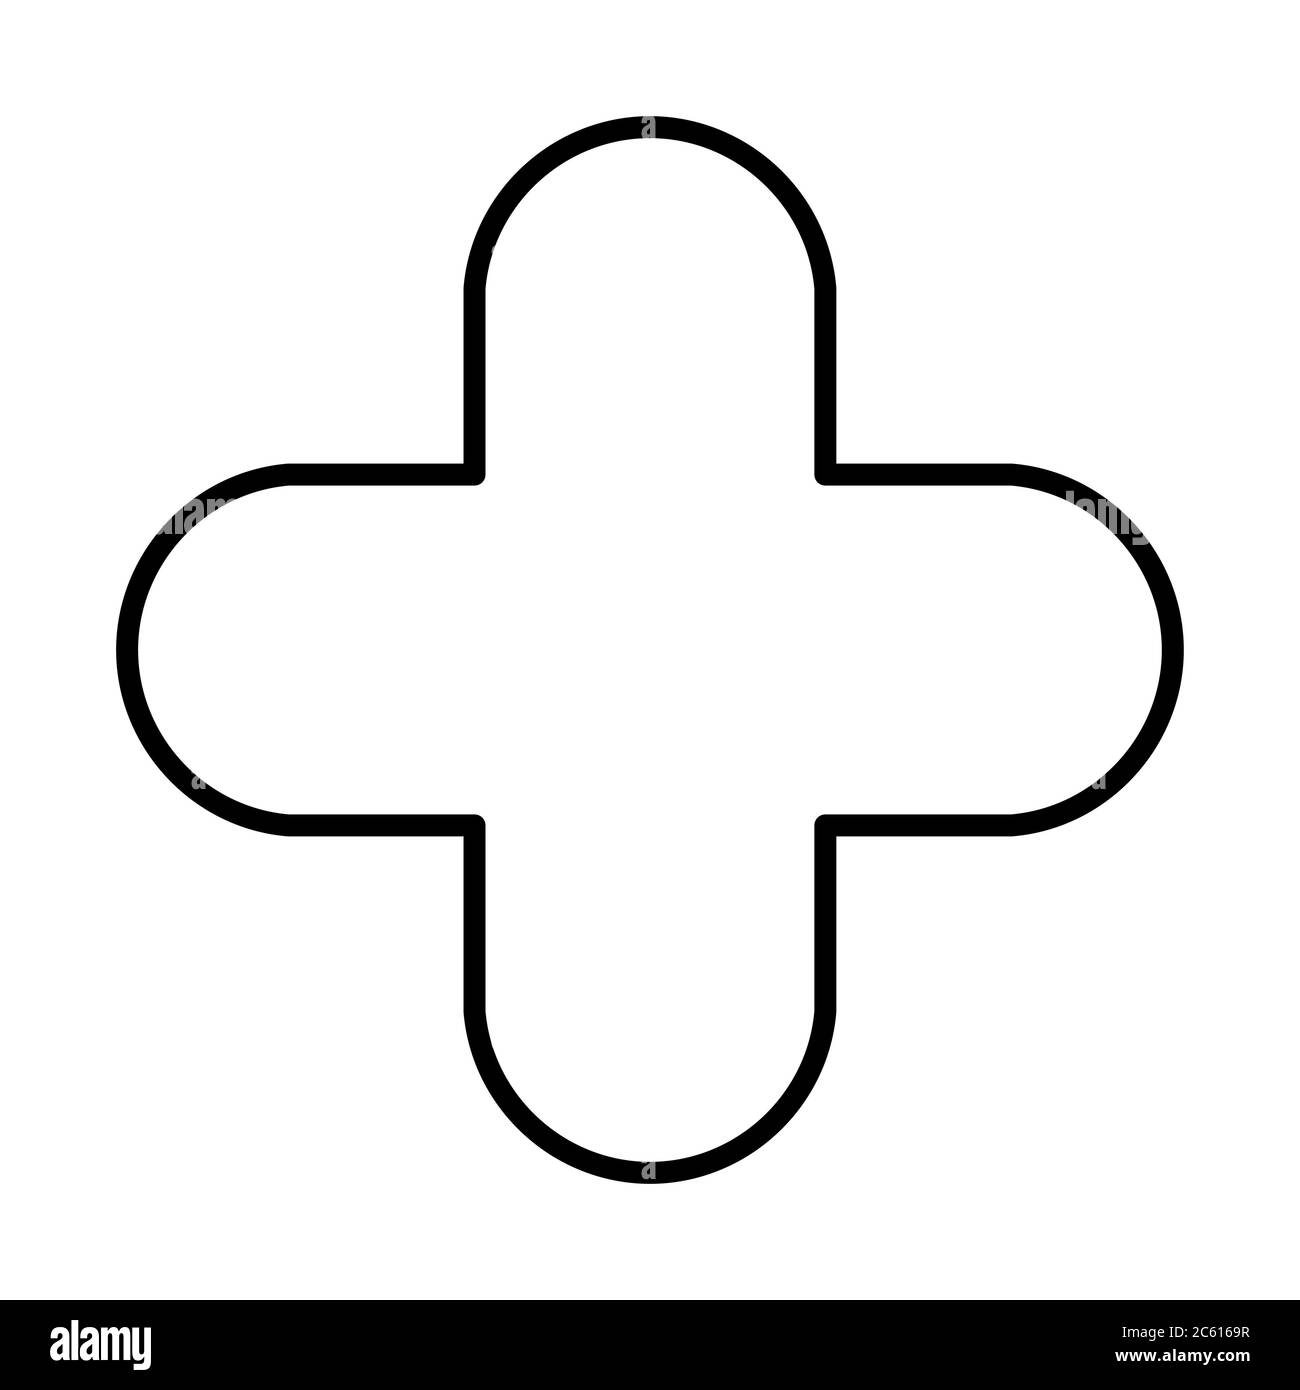 Hospital cross symbol, Medical health icon isolated on white background. Emergency design . Stock Vector